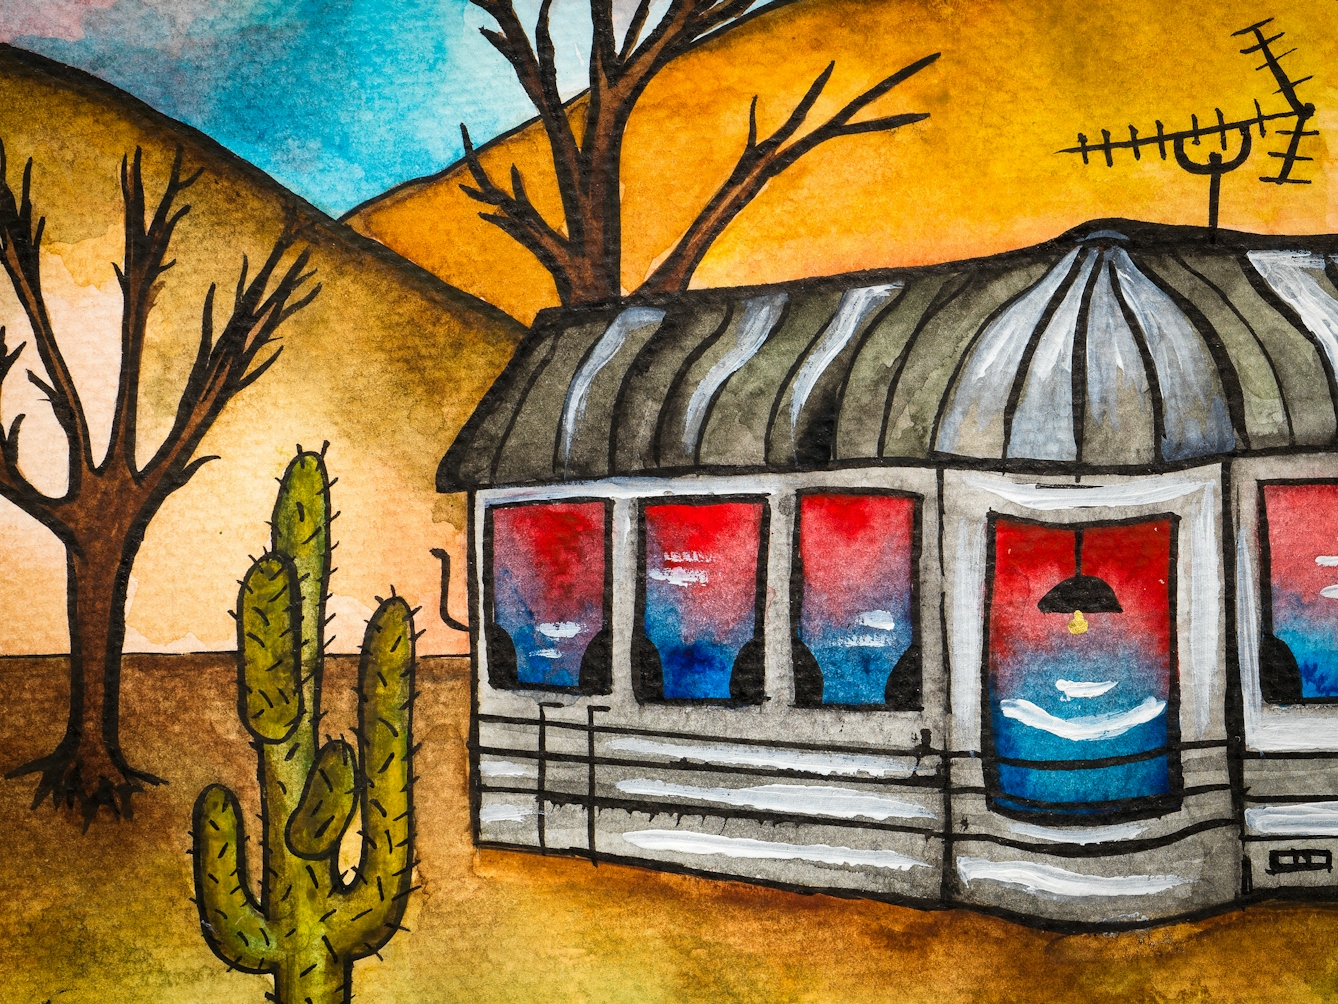 Detail from a larger colourful artwork. The artwork shows a grey building with an aerial on the roof. To the left of this, there are several trees with bare branches and a large cactus. The ground is brown and orange. 